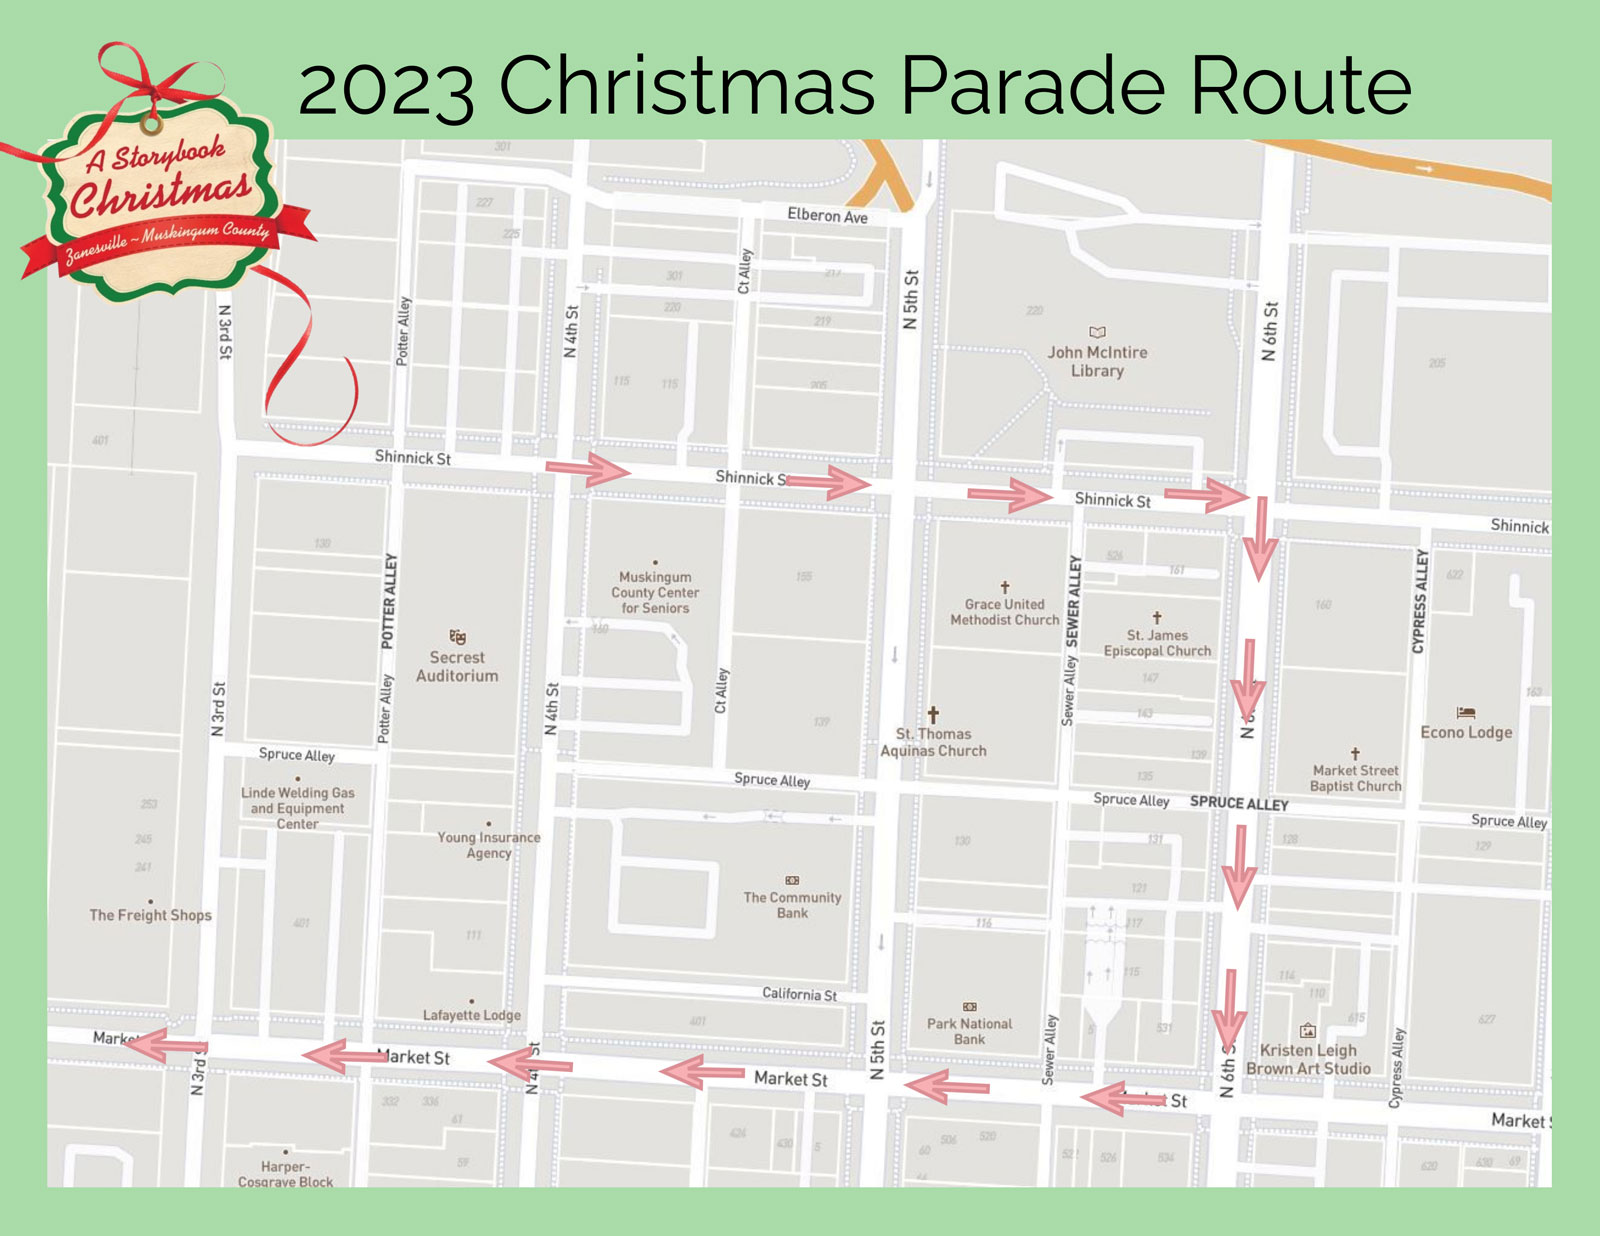 Downtown Zanesville Storybook Christmas Parade Route